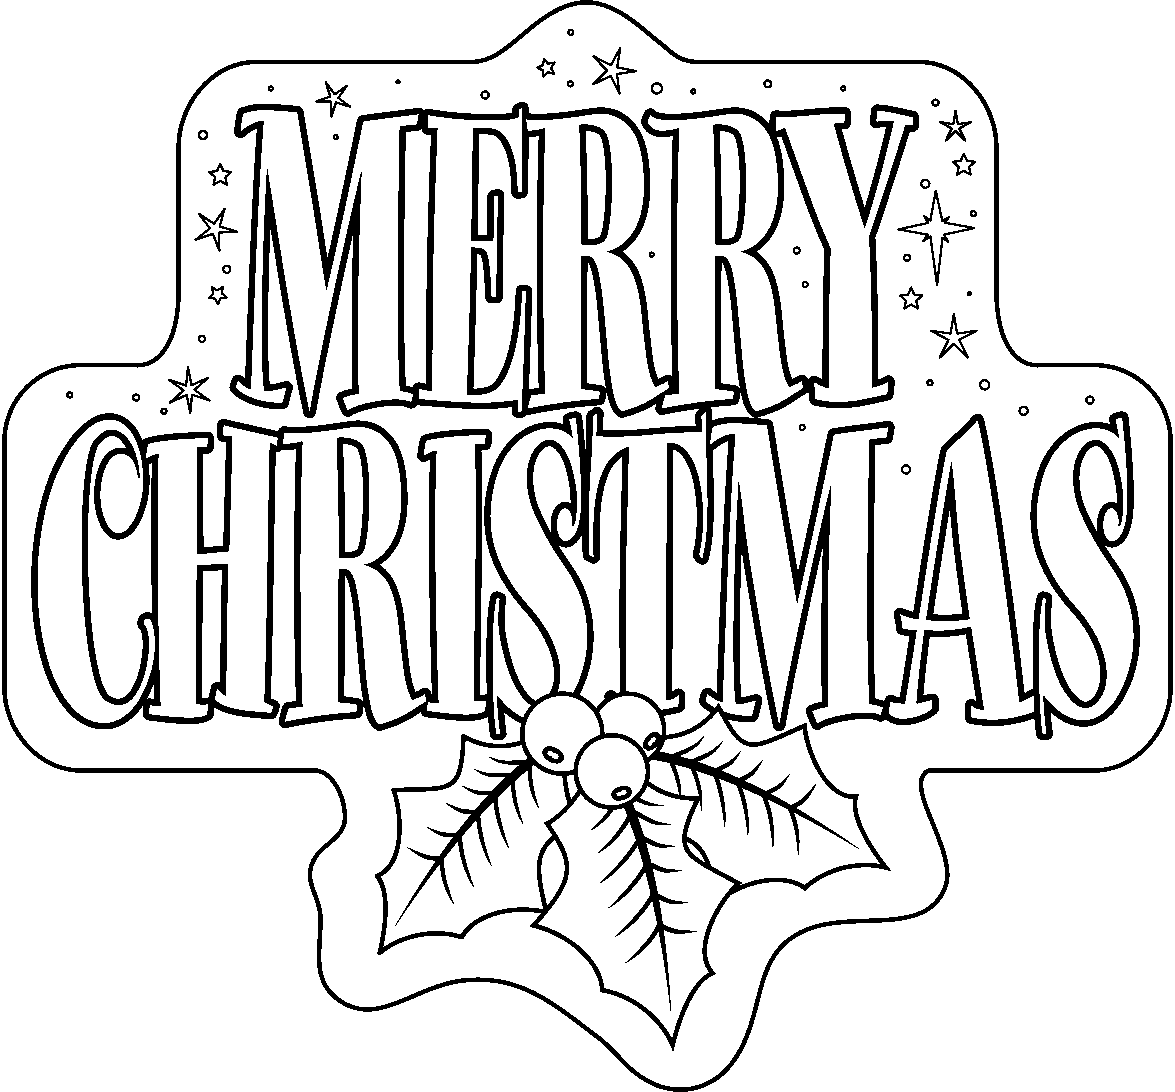 merry-christmas coloring page to print,printable,coloring pages